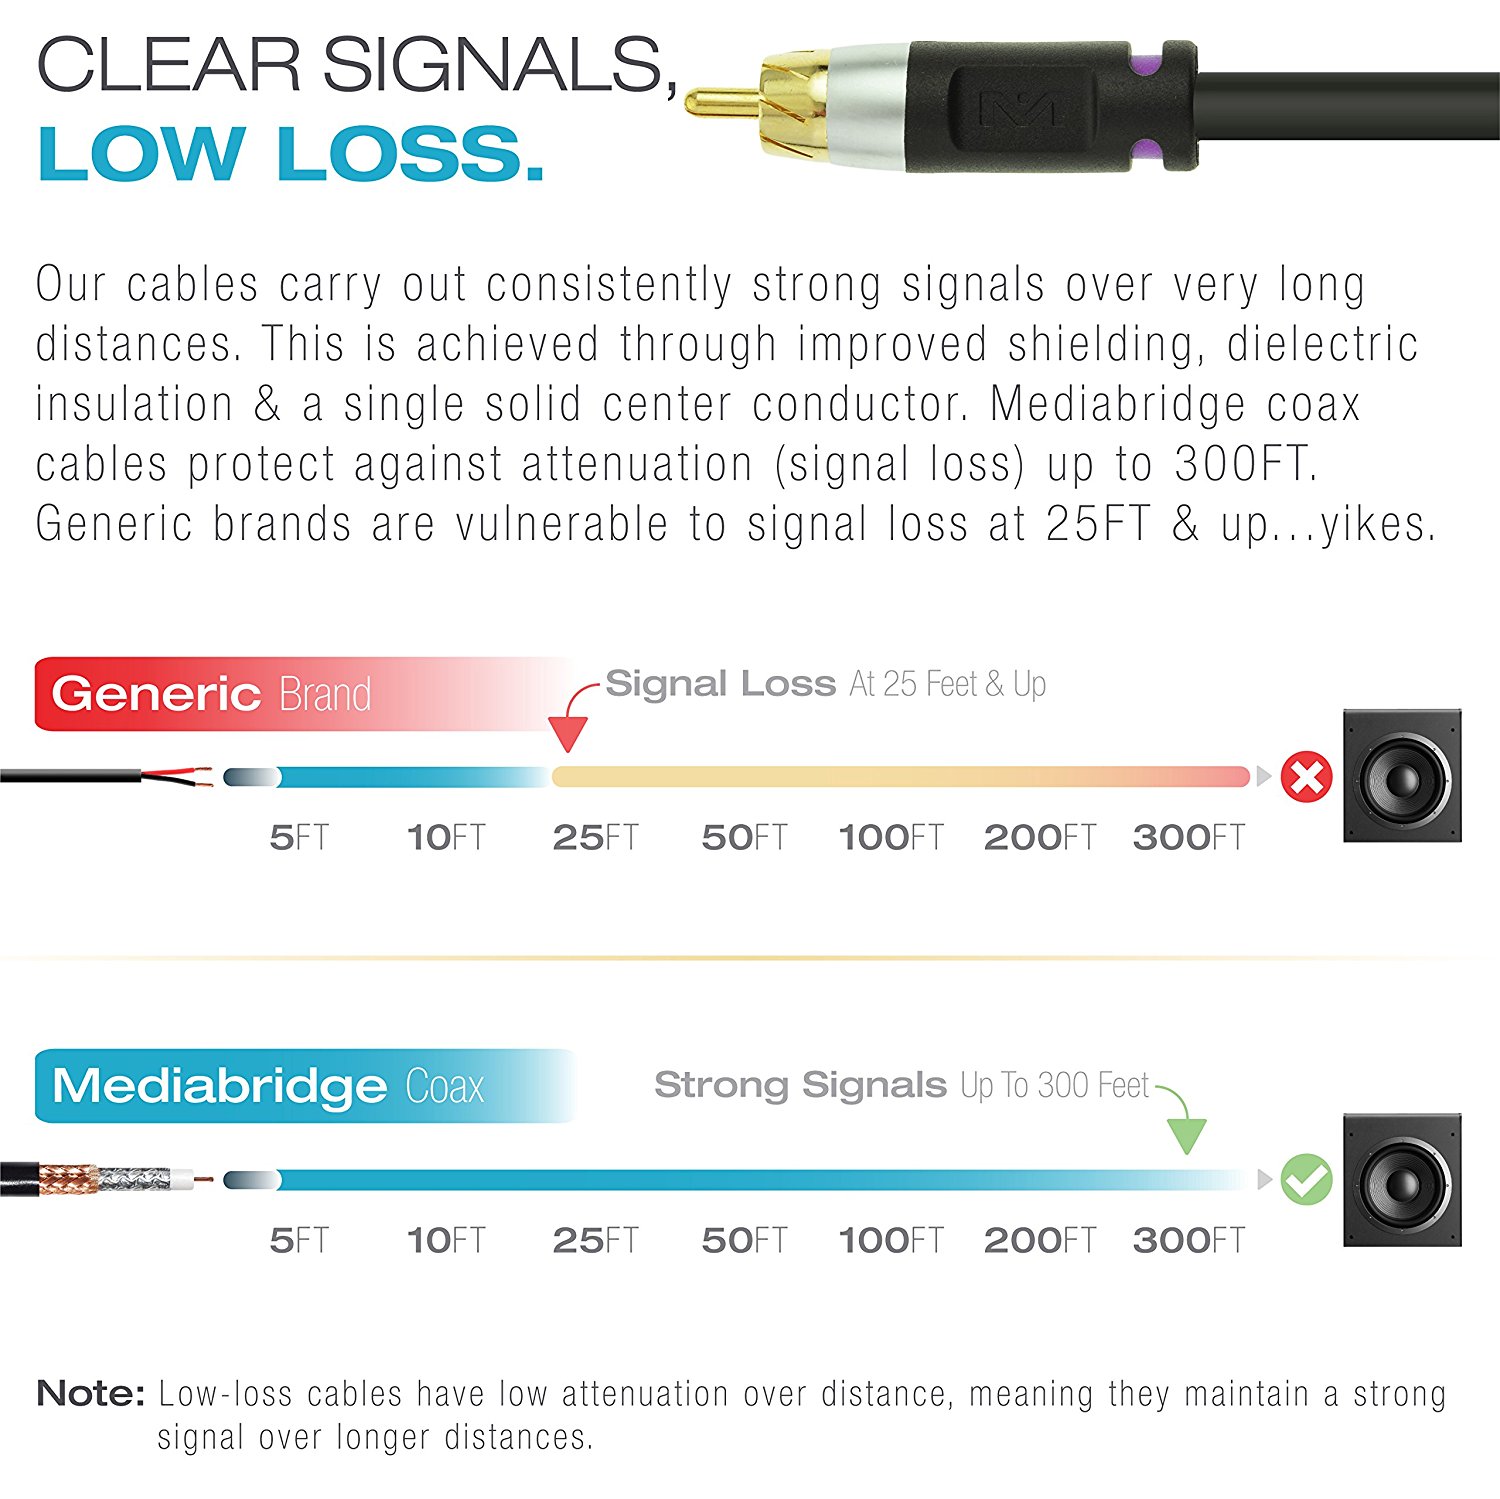 Mediabridge ULTRA Series Subwoofer Cable (15 Feet) - Dual Shielded with Gold Plated RCA to RCA Connectors - Black - image 3 of 6